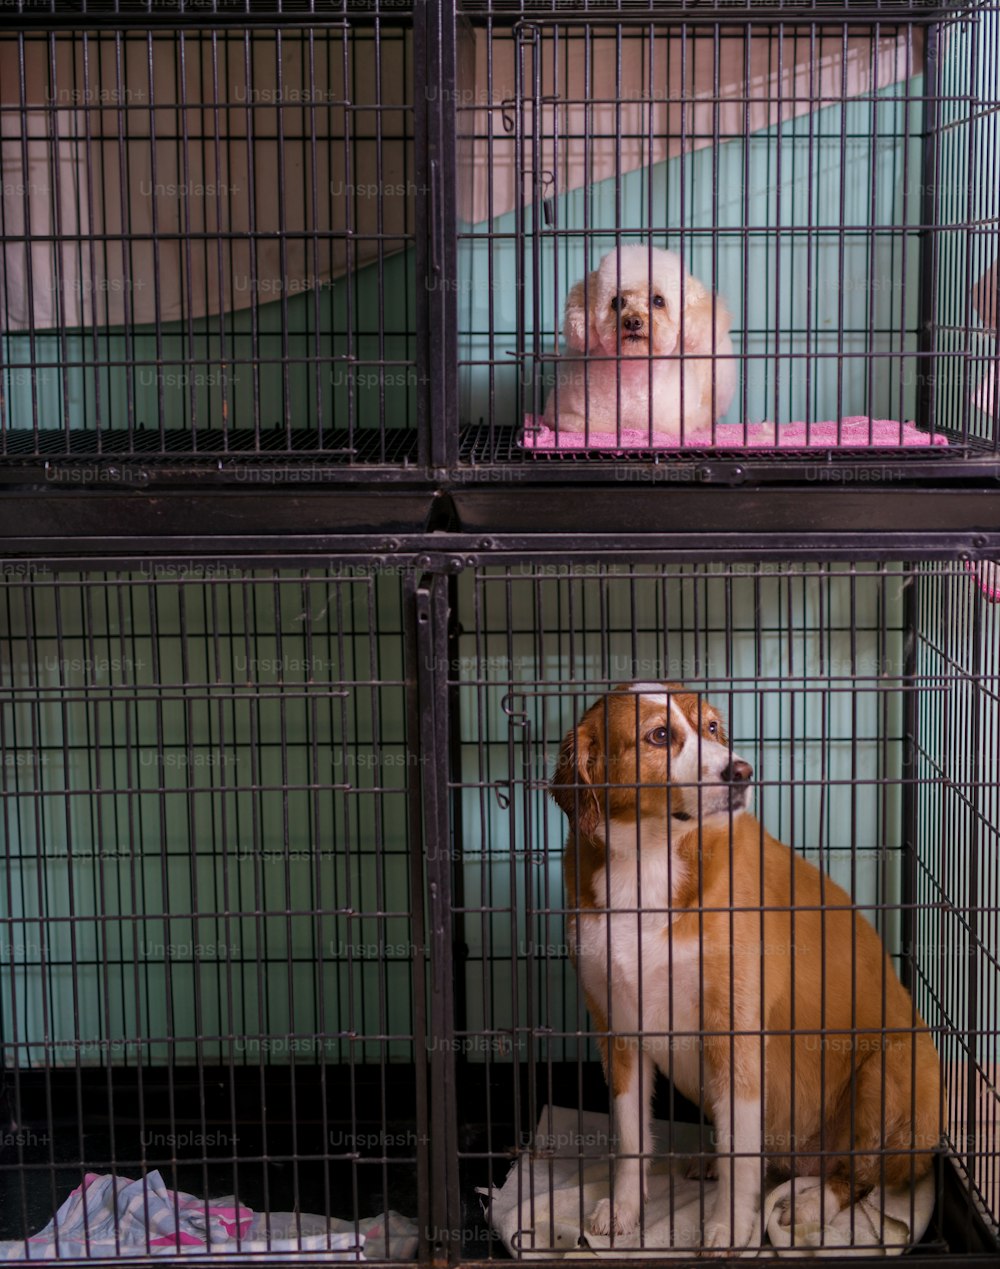 Sad small white and bigger white and brown dog sitting in cages stacked on each other waiting to find a new owner.